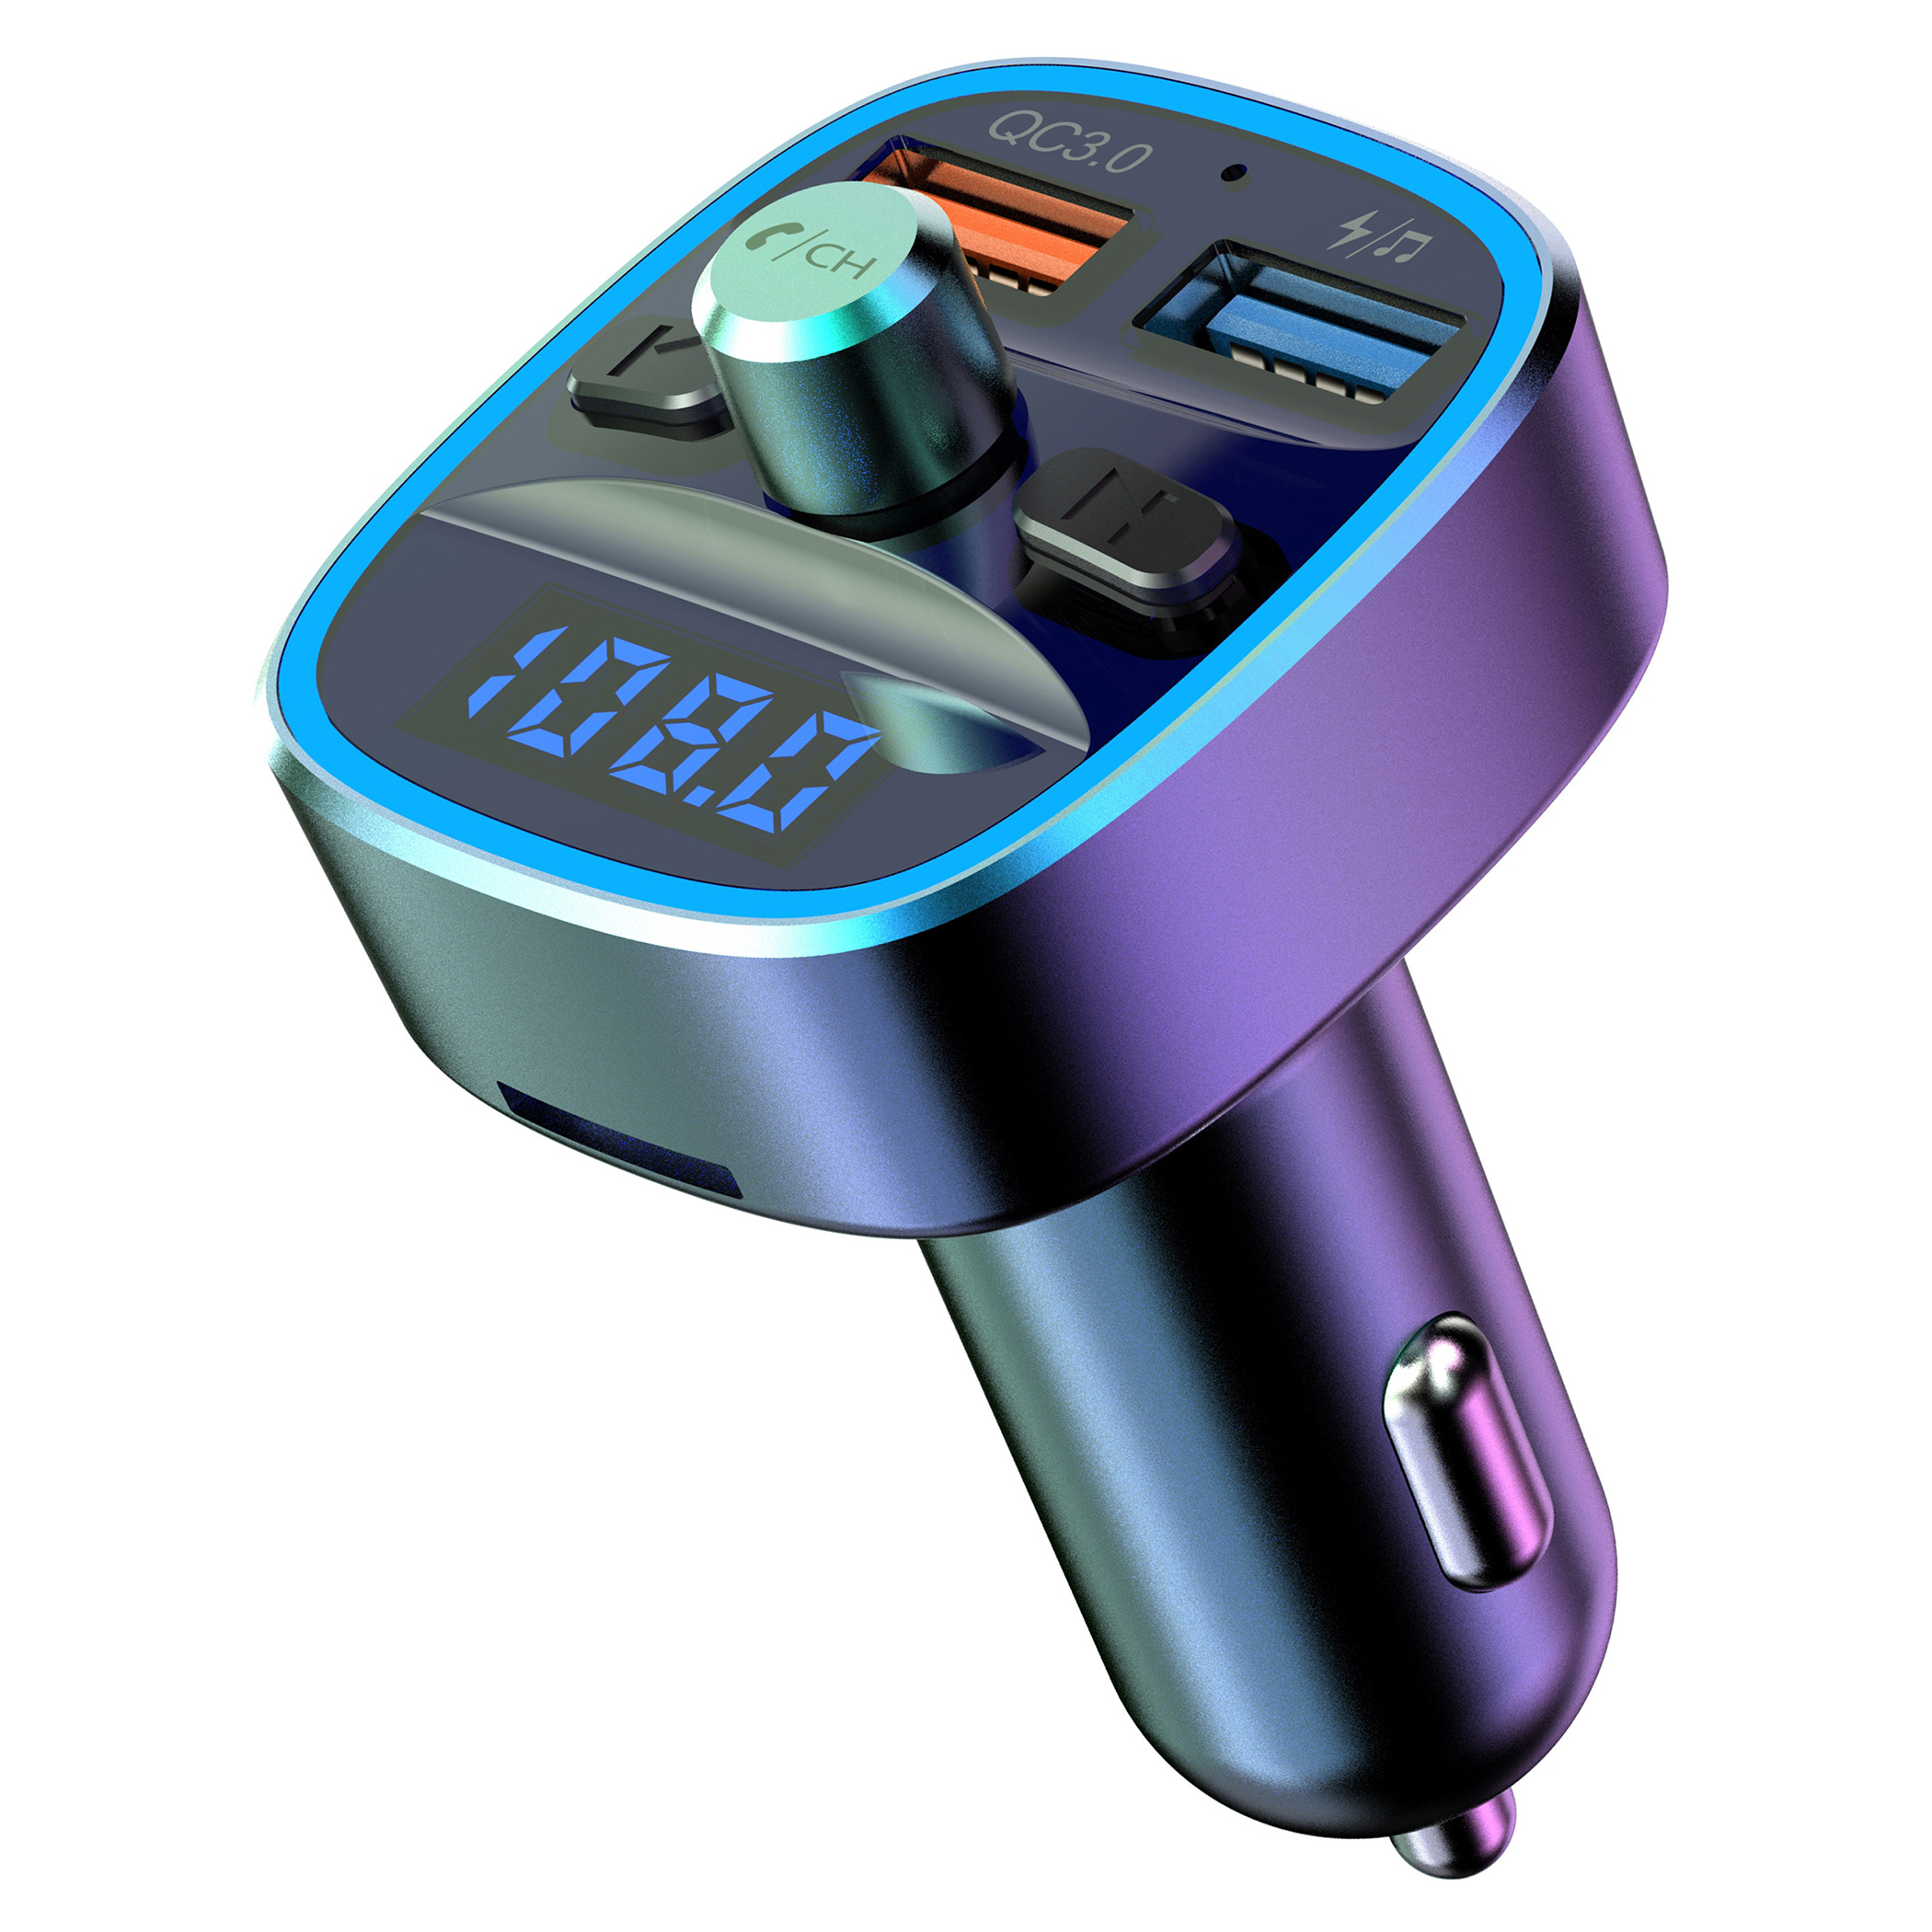 Bluetooth Fm Transmitter, Bluetooth Car Adapter, Qc3.0 Fast Charger,  Bluetooth Cigarette Lighter With Hand -free Call, Bluetooth Car, Mp3 Music  Player